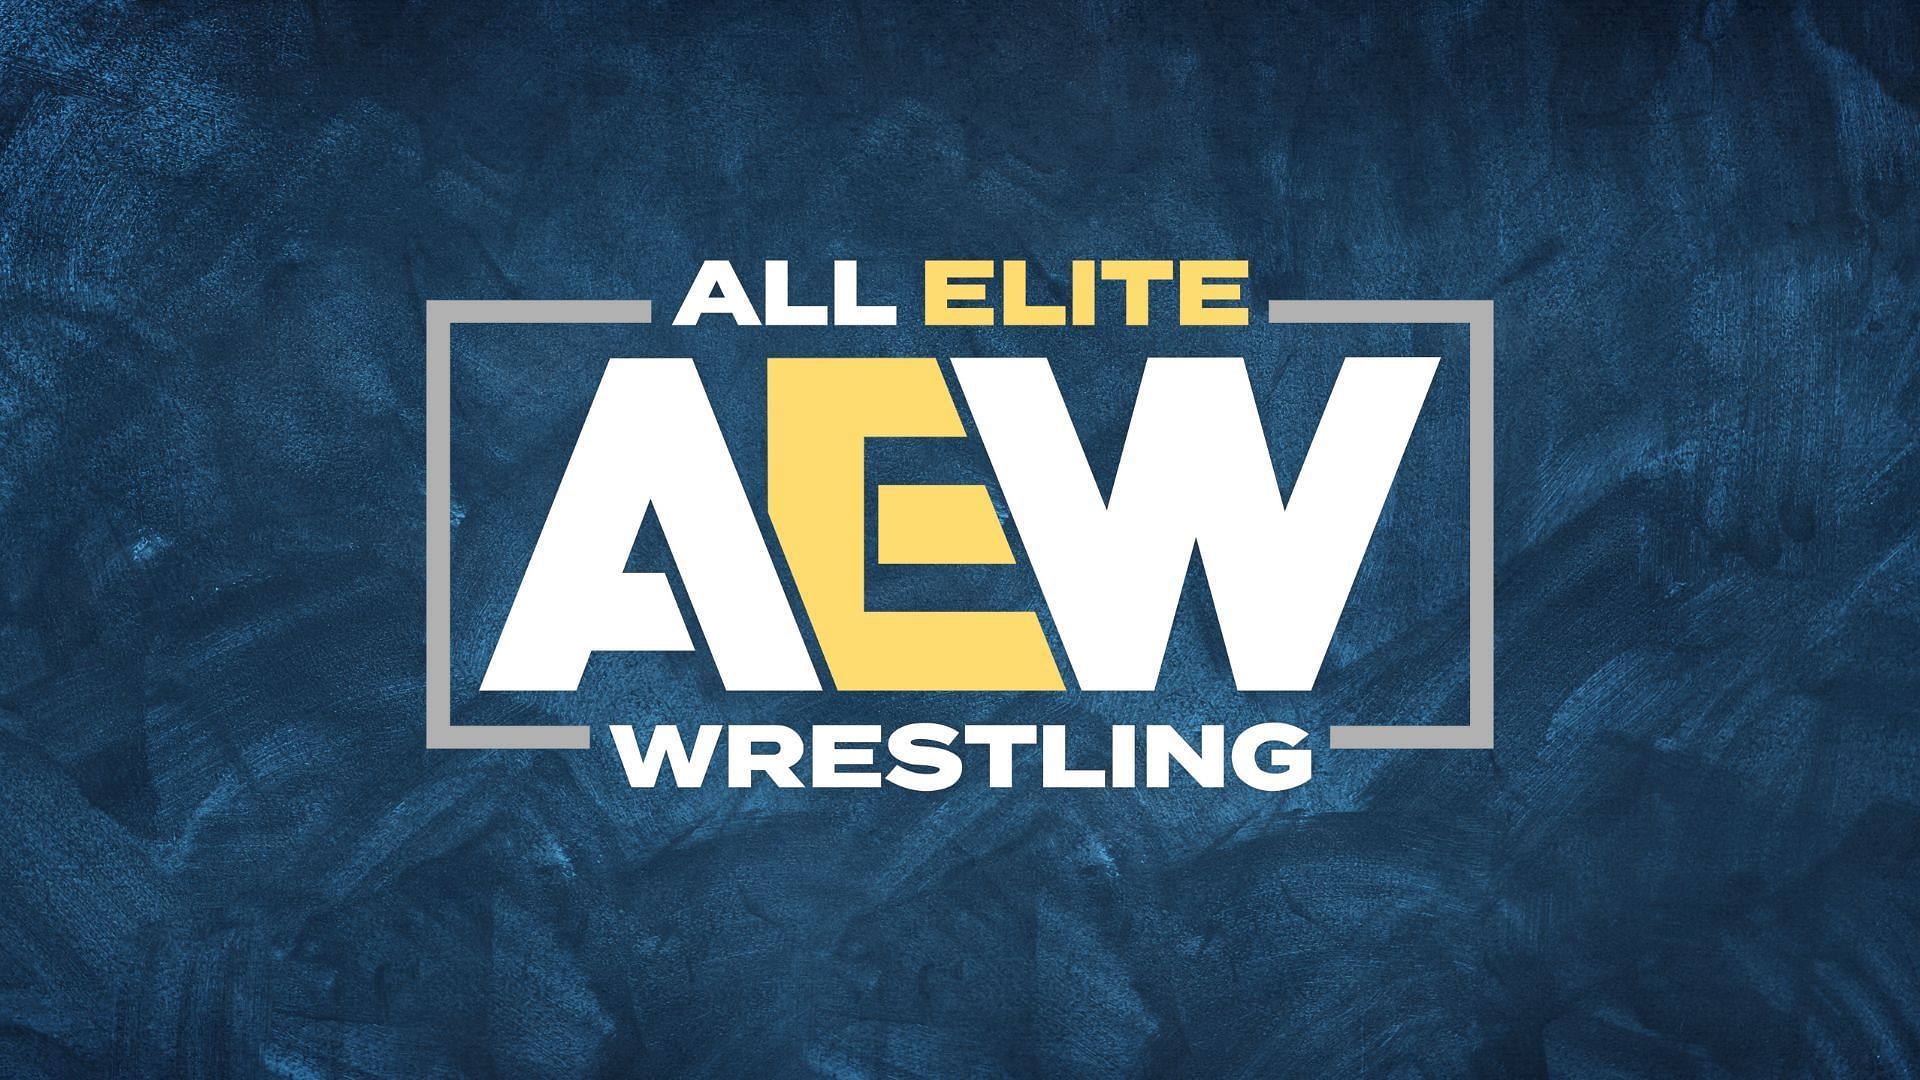 AEW has some of the best tag teams in the world